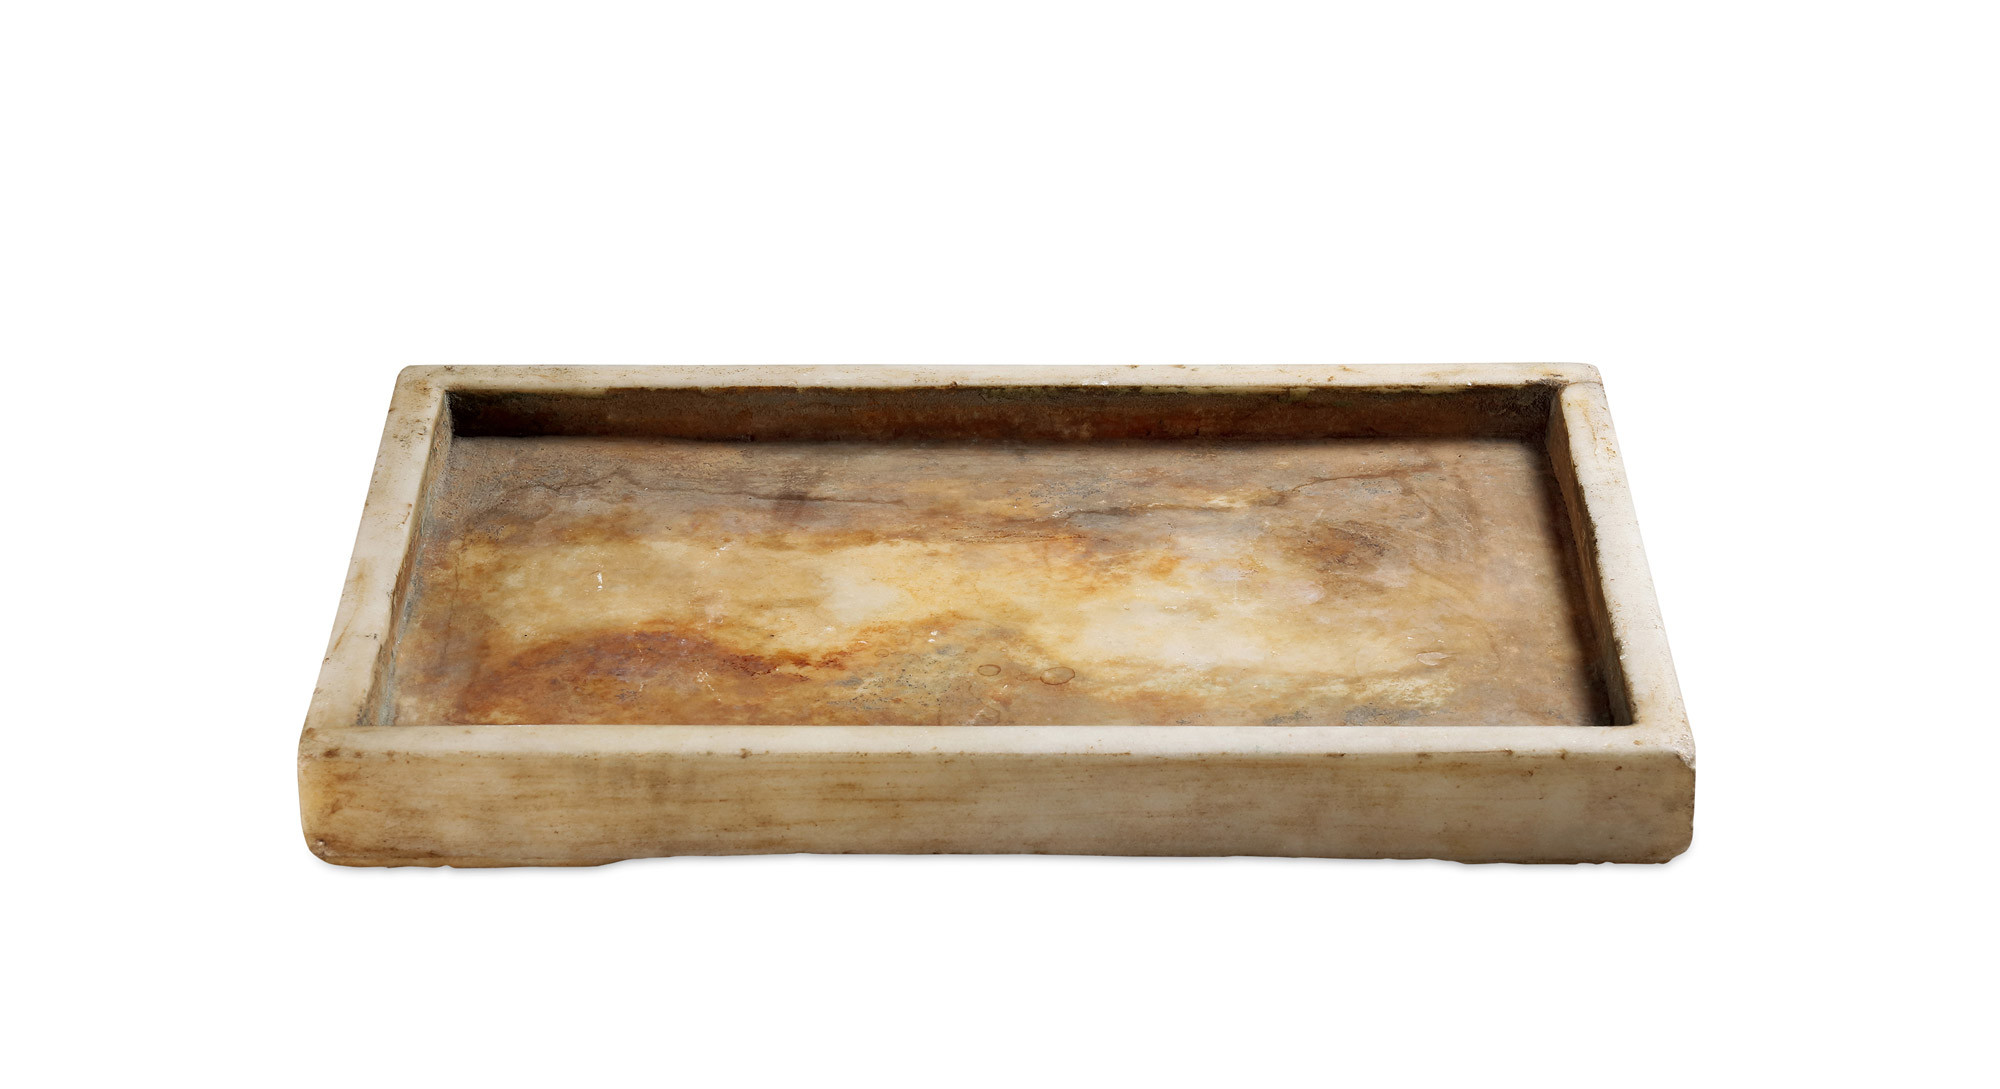 A Rectangular-Shaped Marble Tray